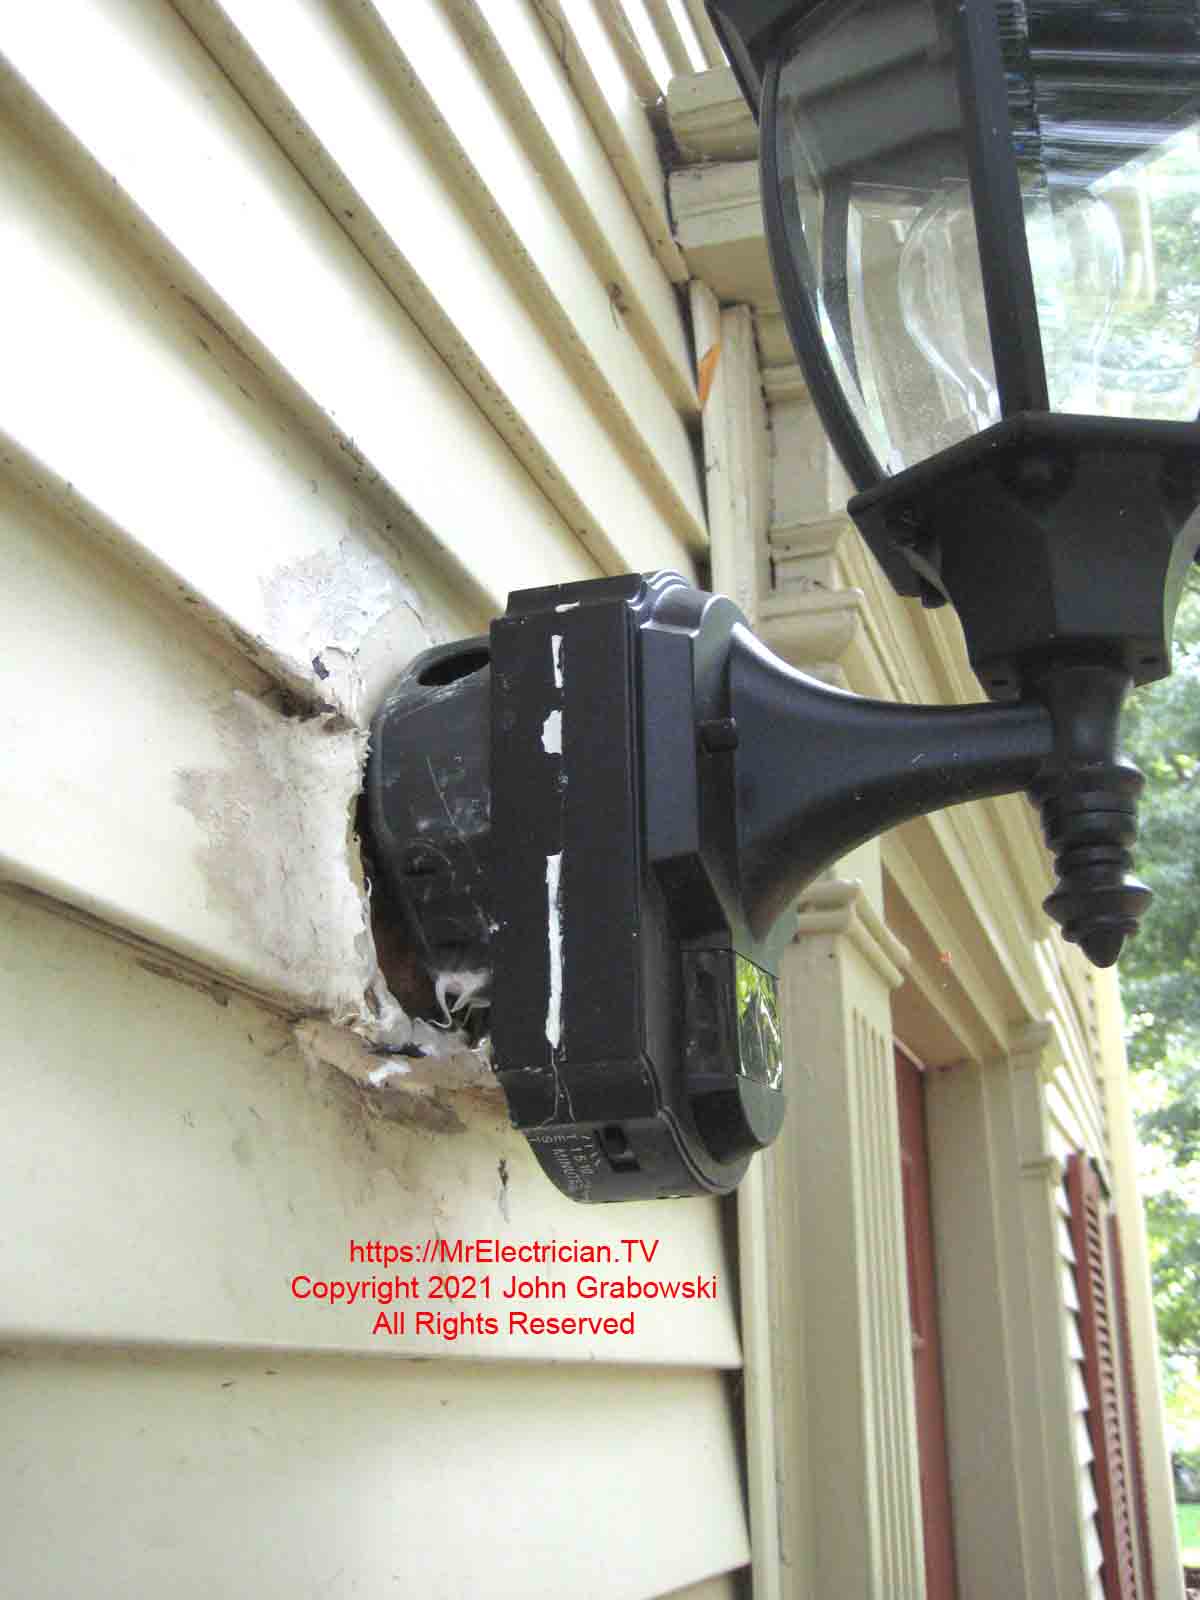 Side view of an outdoor light fixture mounted to a surface mounted indoor electrical box